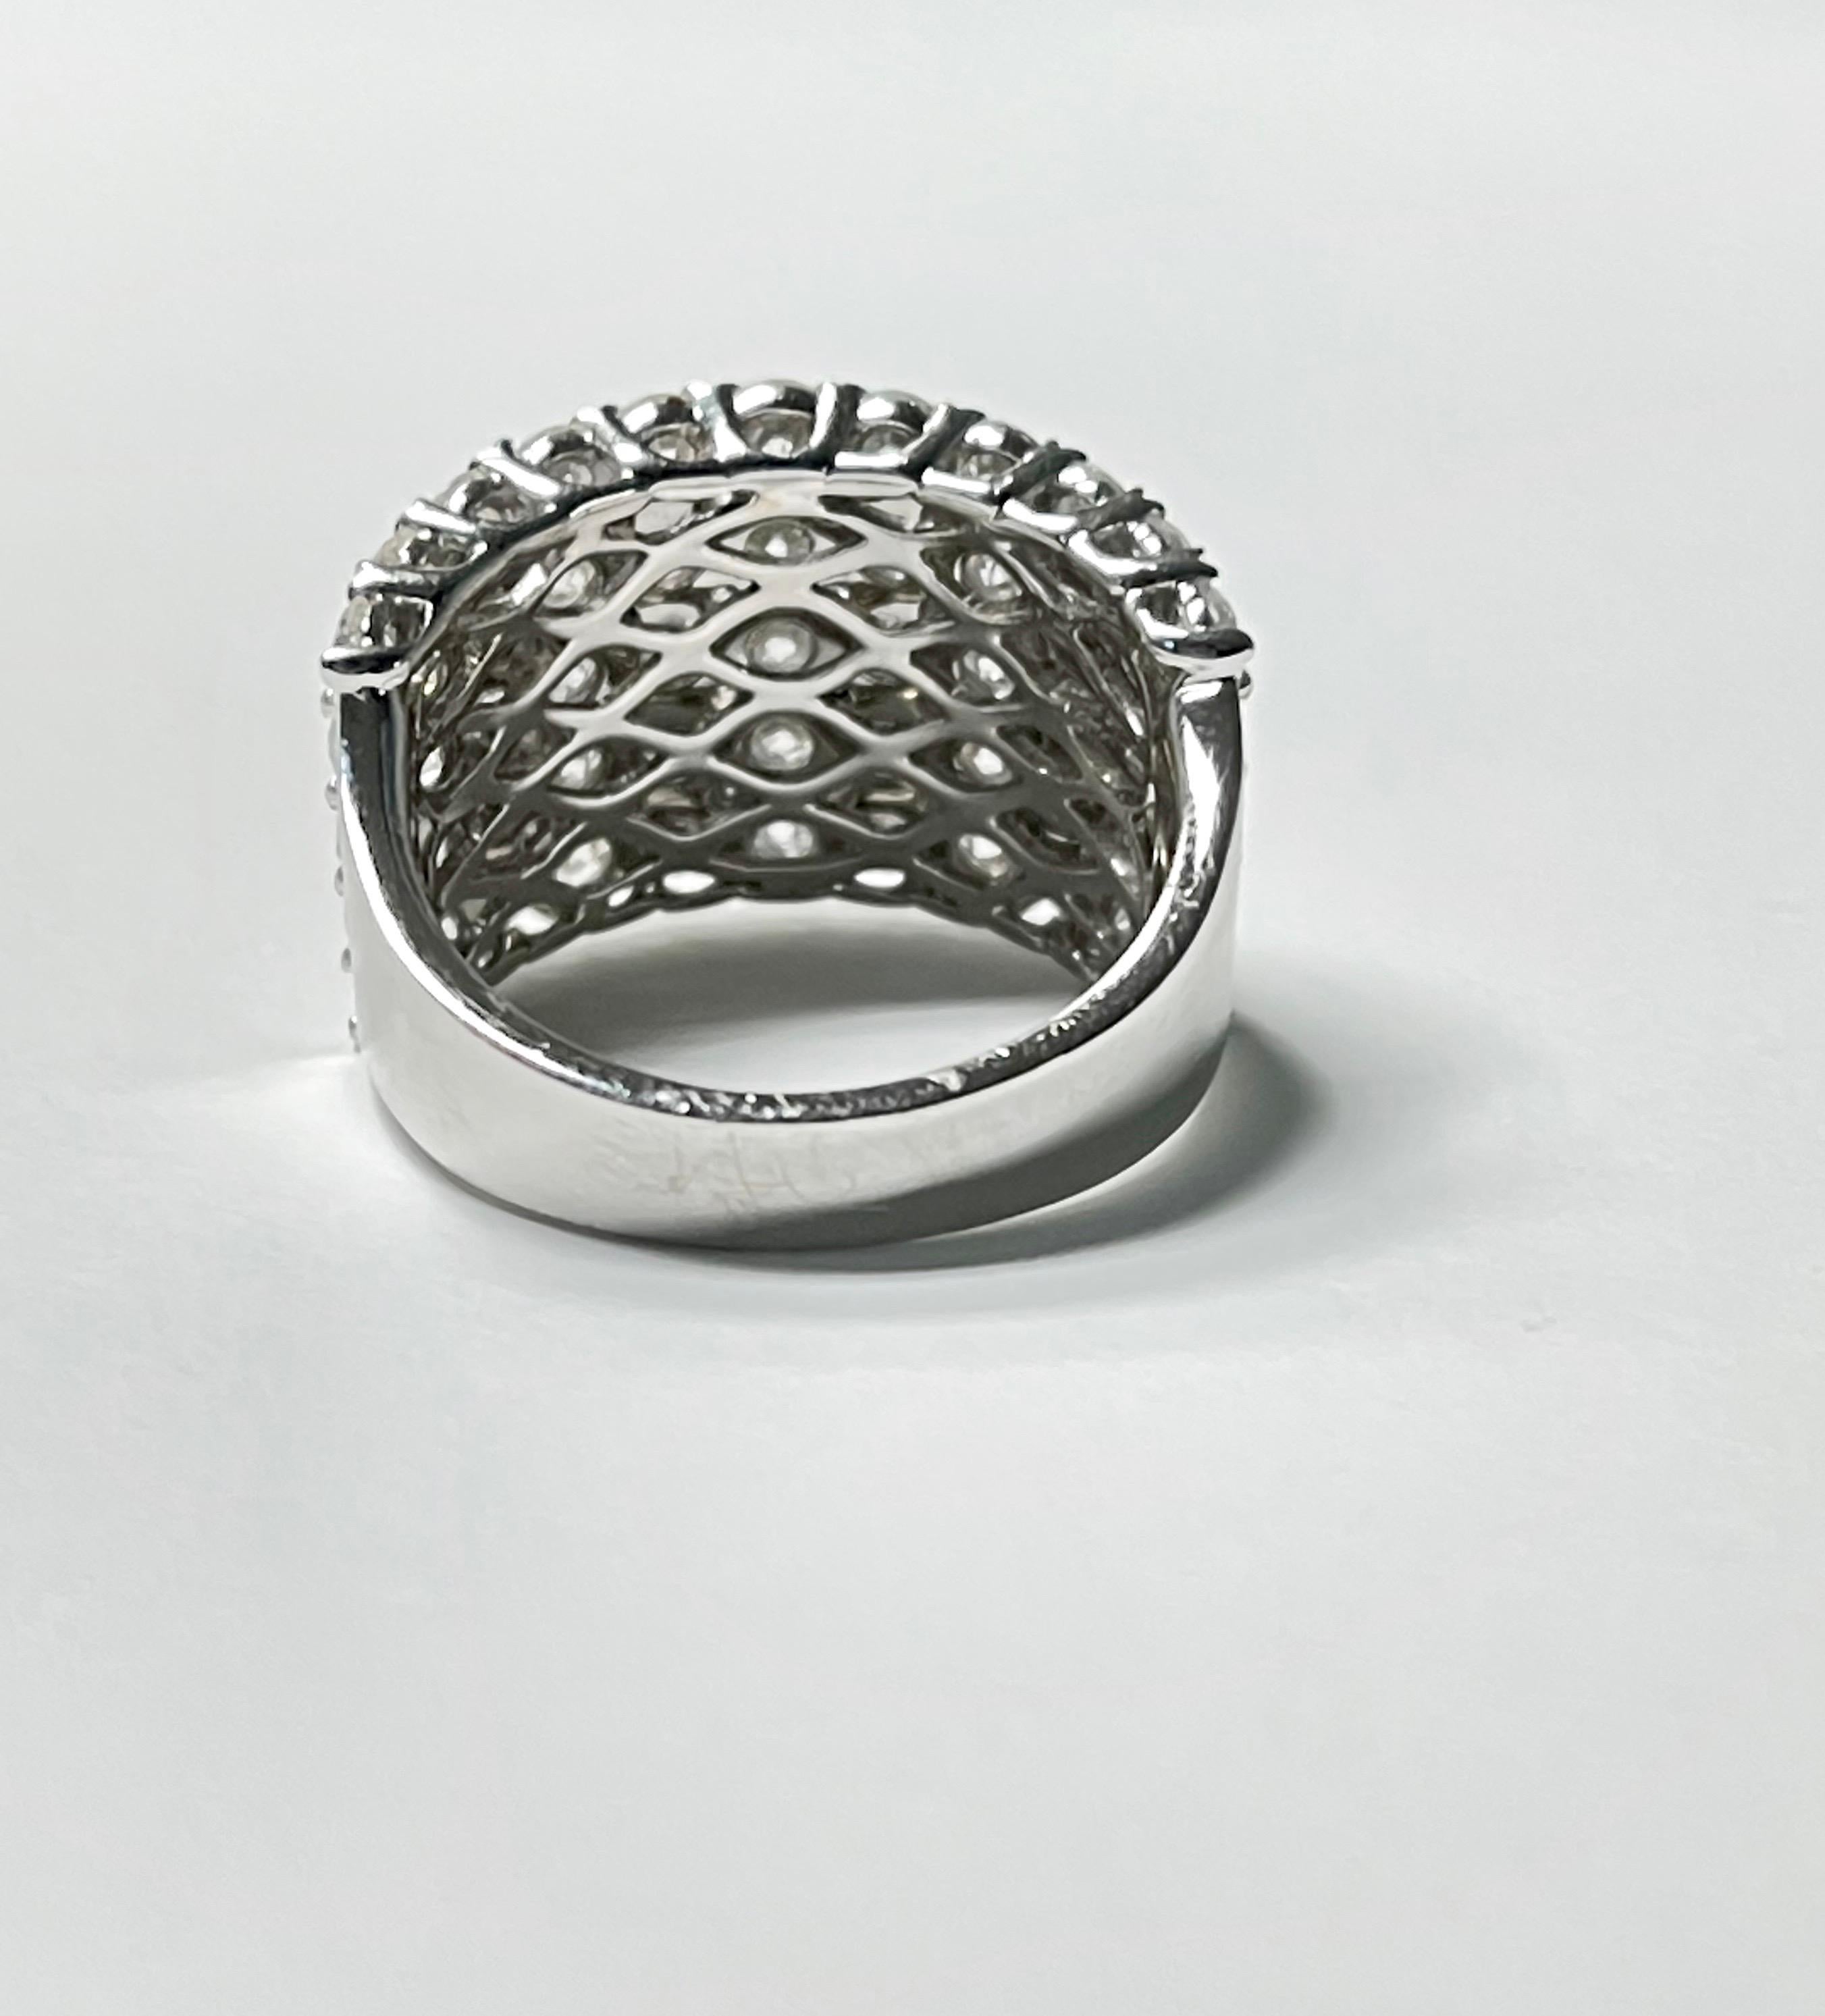 4.62 Carat White Diamond Pave Set Ring in 18K White Gold In New Condition For Sale In New York, NY